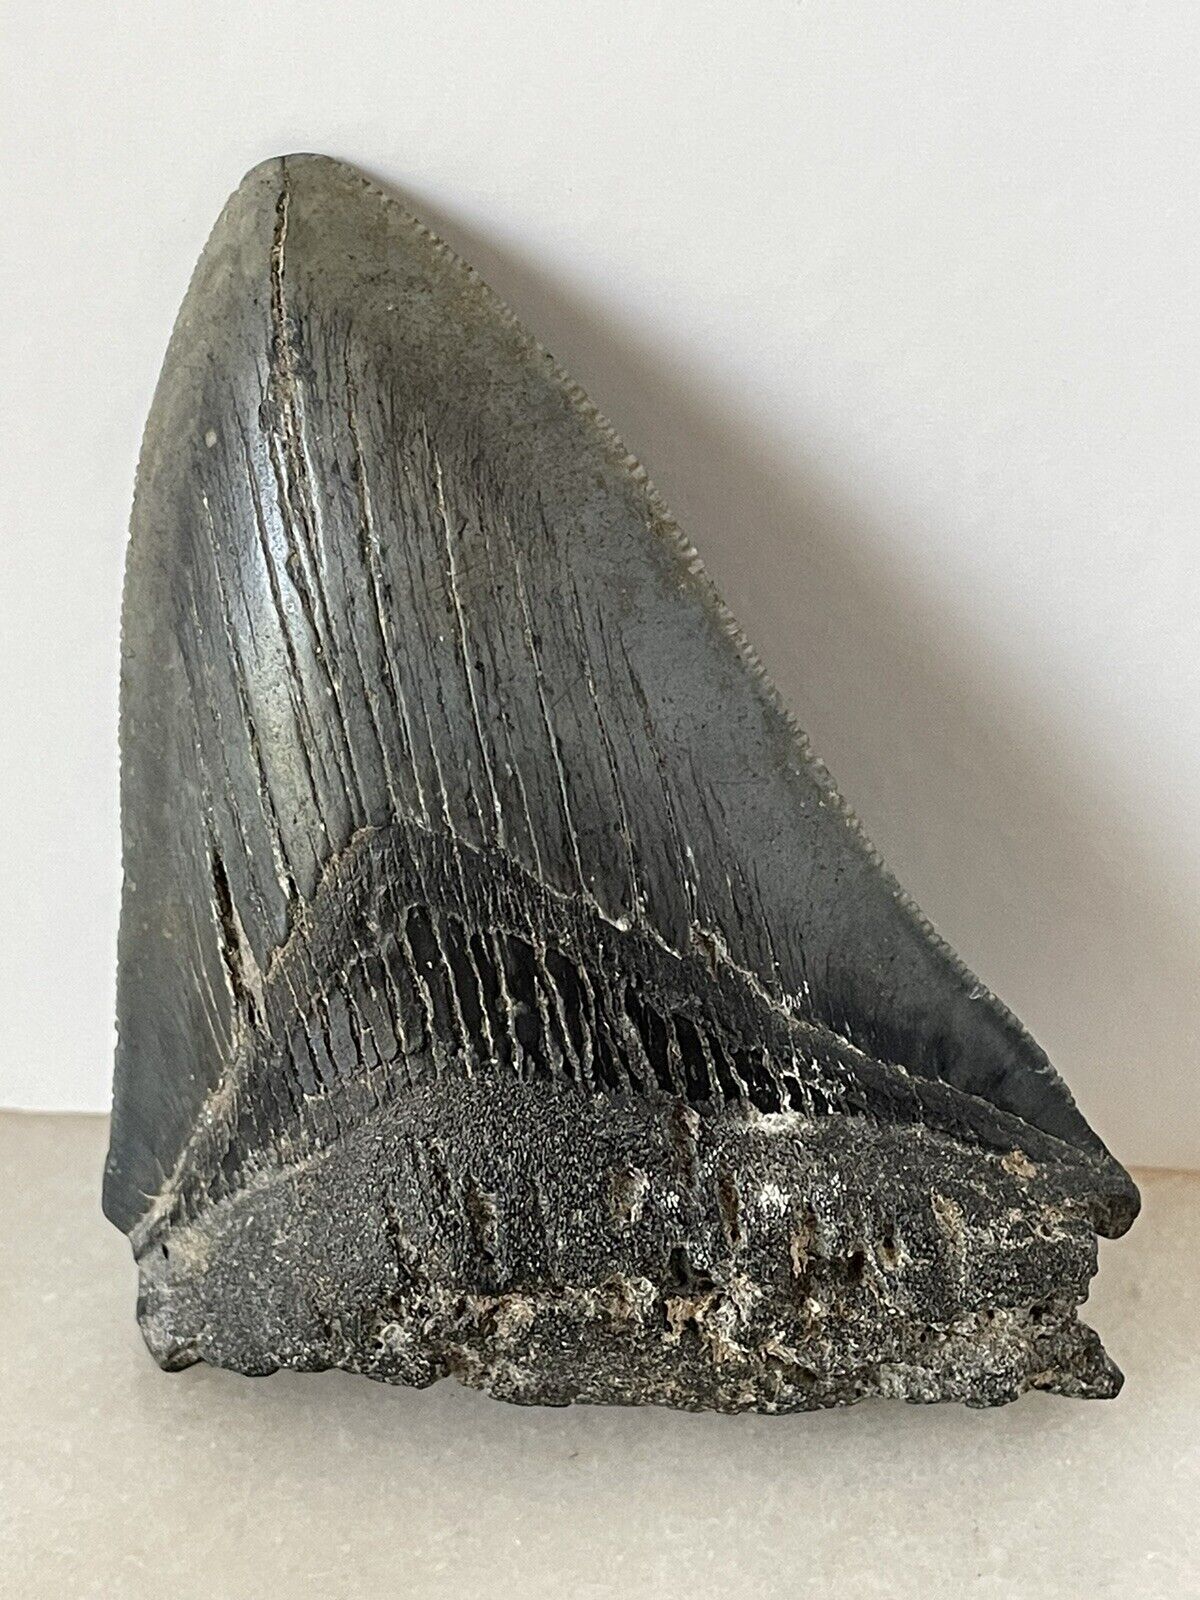 4 INCH REAL MEGALODON SHARK TOOTH FOSSIL.